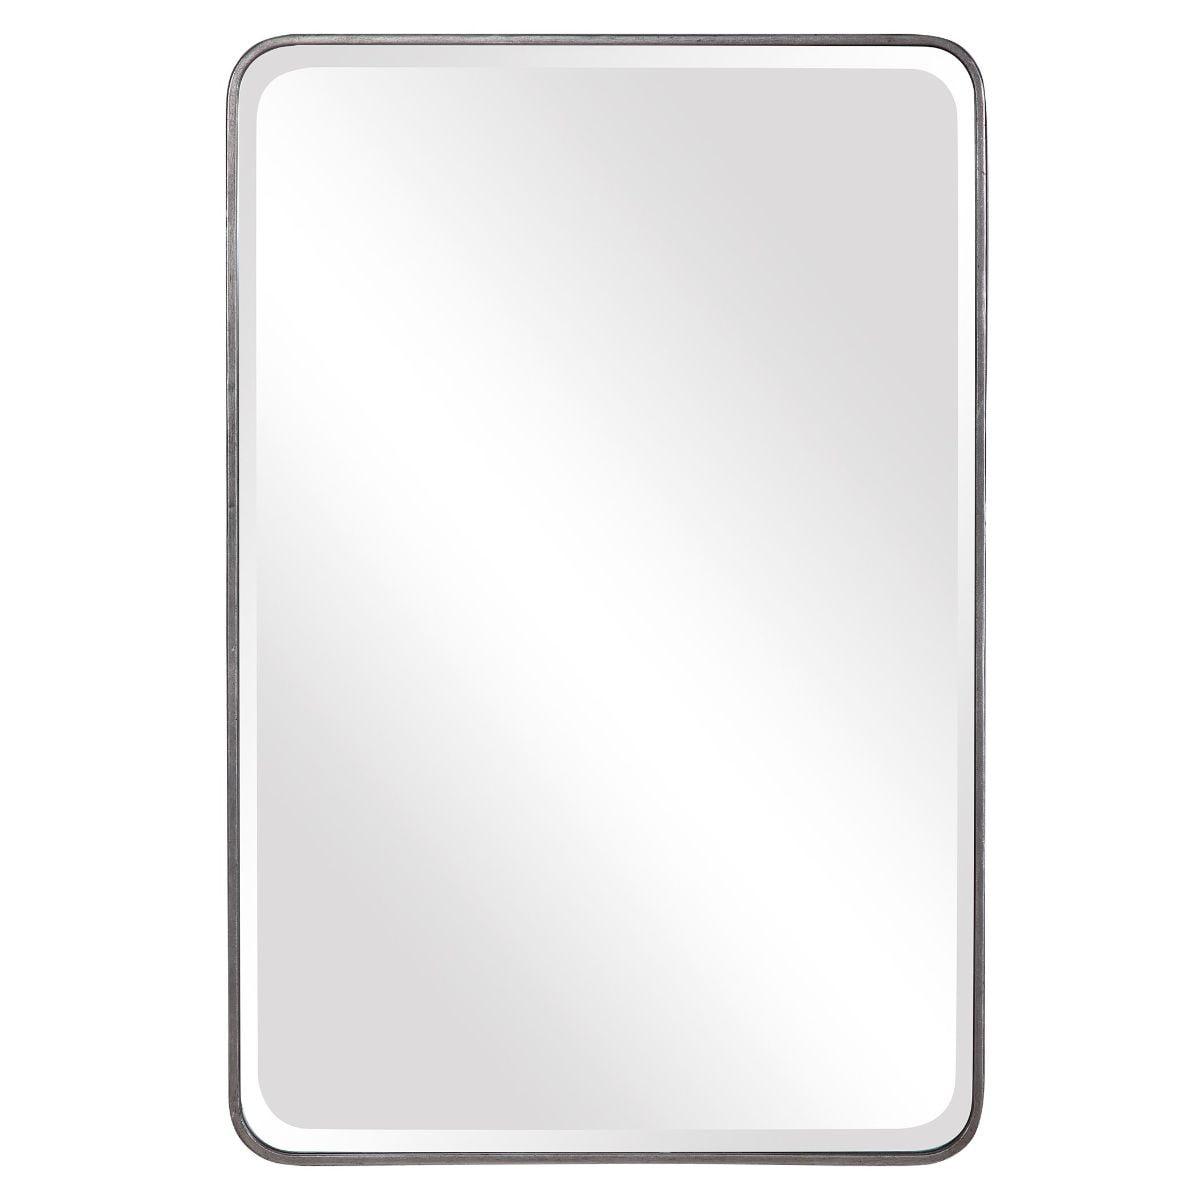 Aramis 36" Silver Rectangular Wall Mirror with Curved Corners